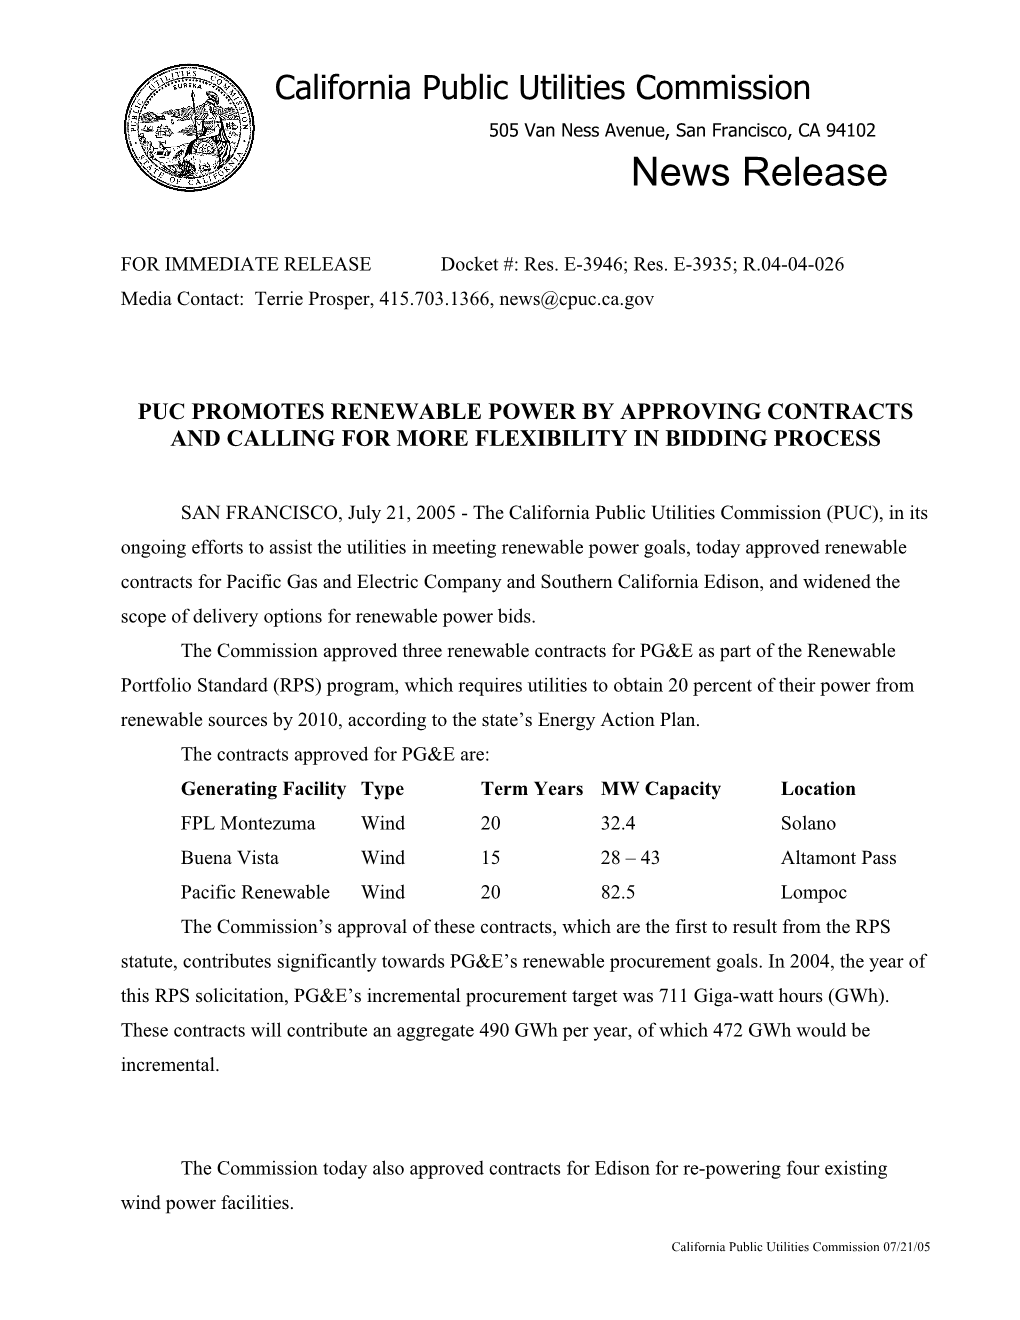 FOR IMMEDIATE RELEASE Docket #: Res. E-3946; Res. E-3935; R.04-04-026